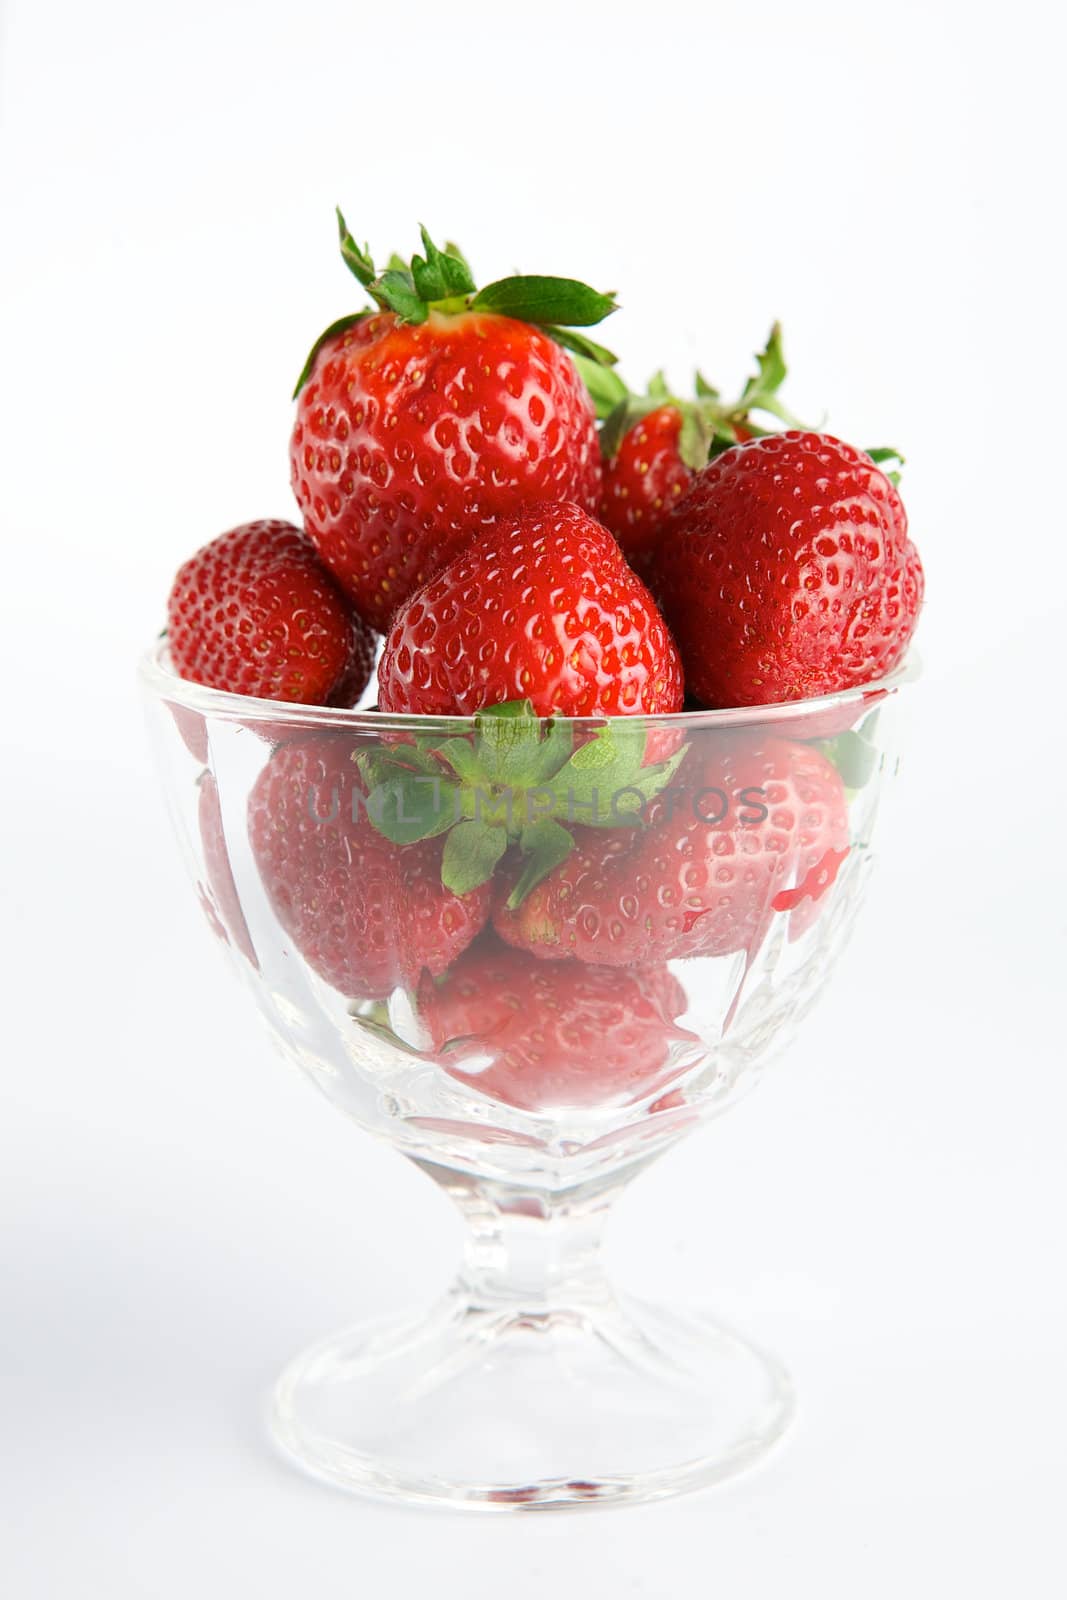 Strawberry in glass container on white background